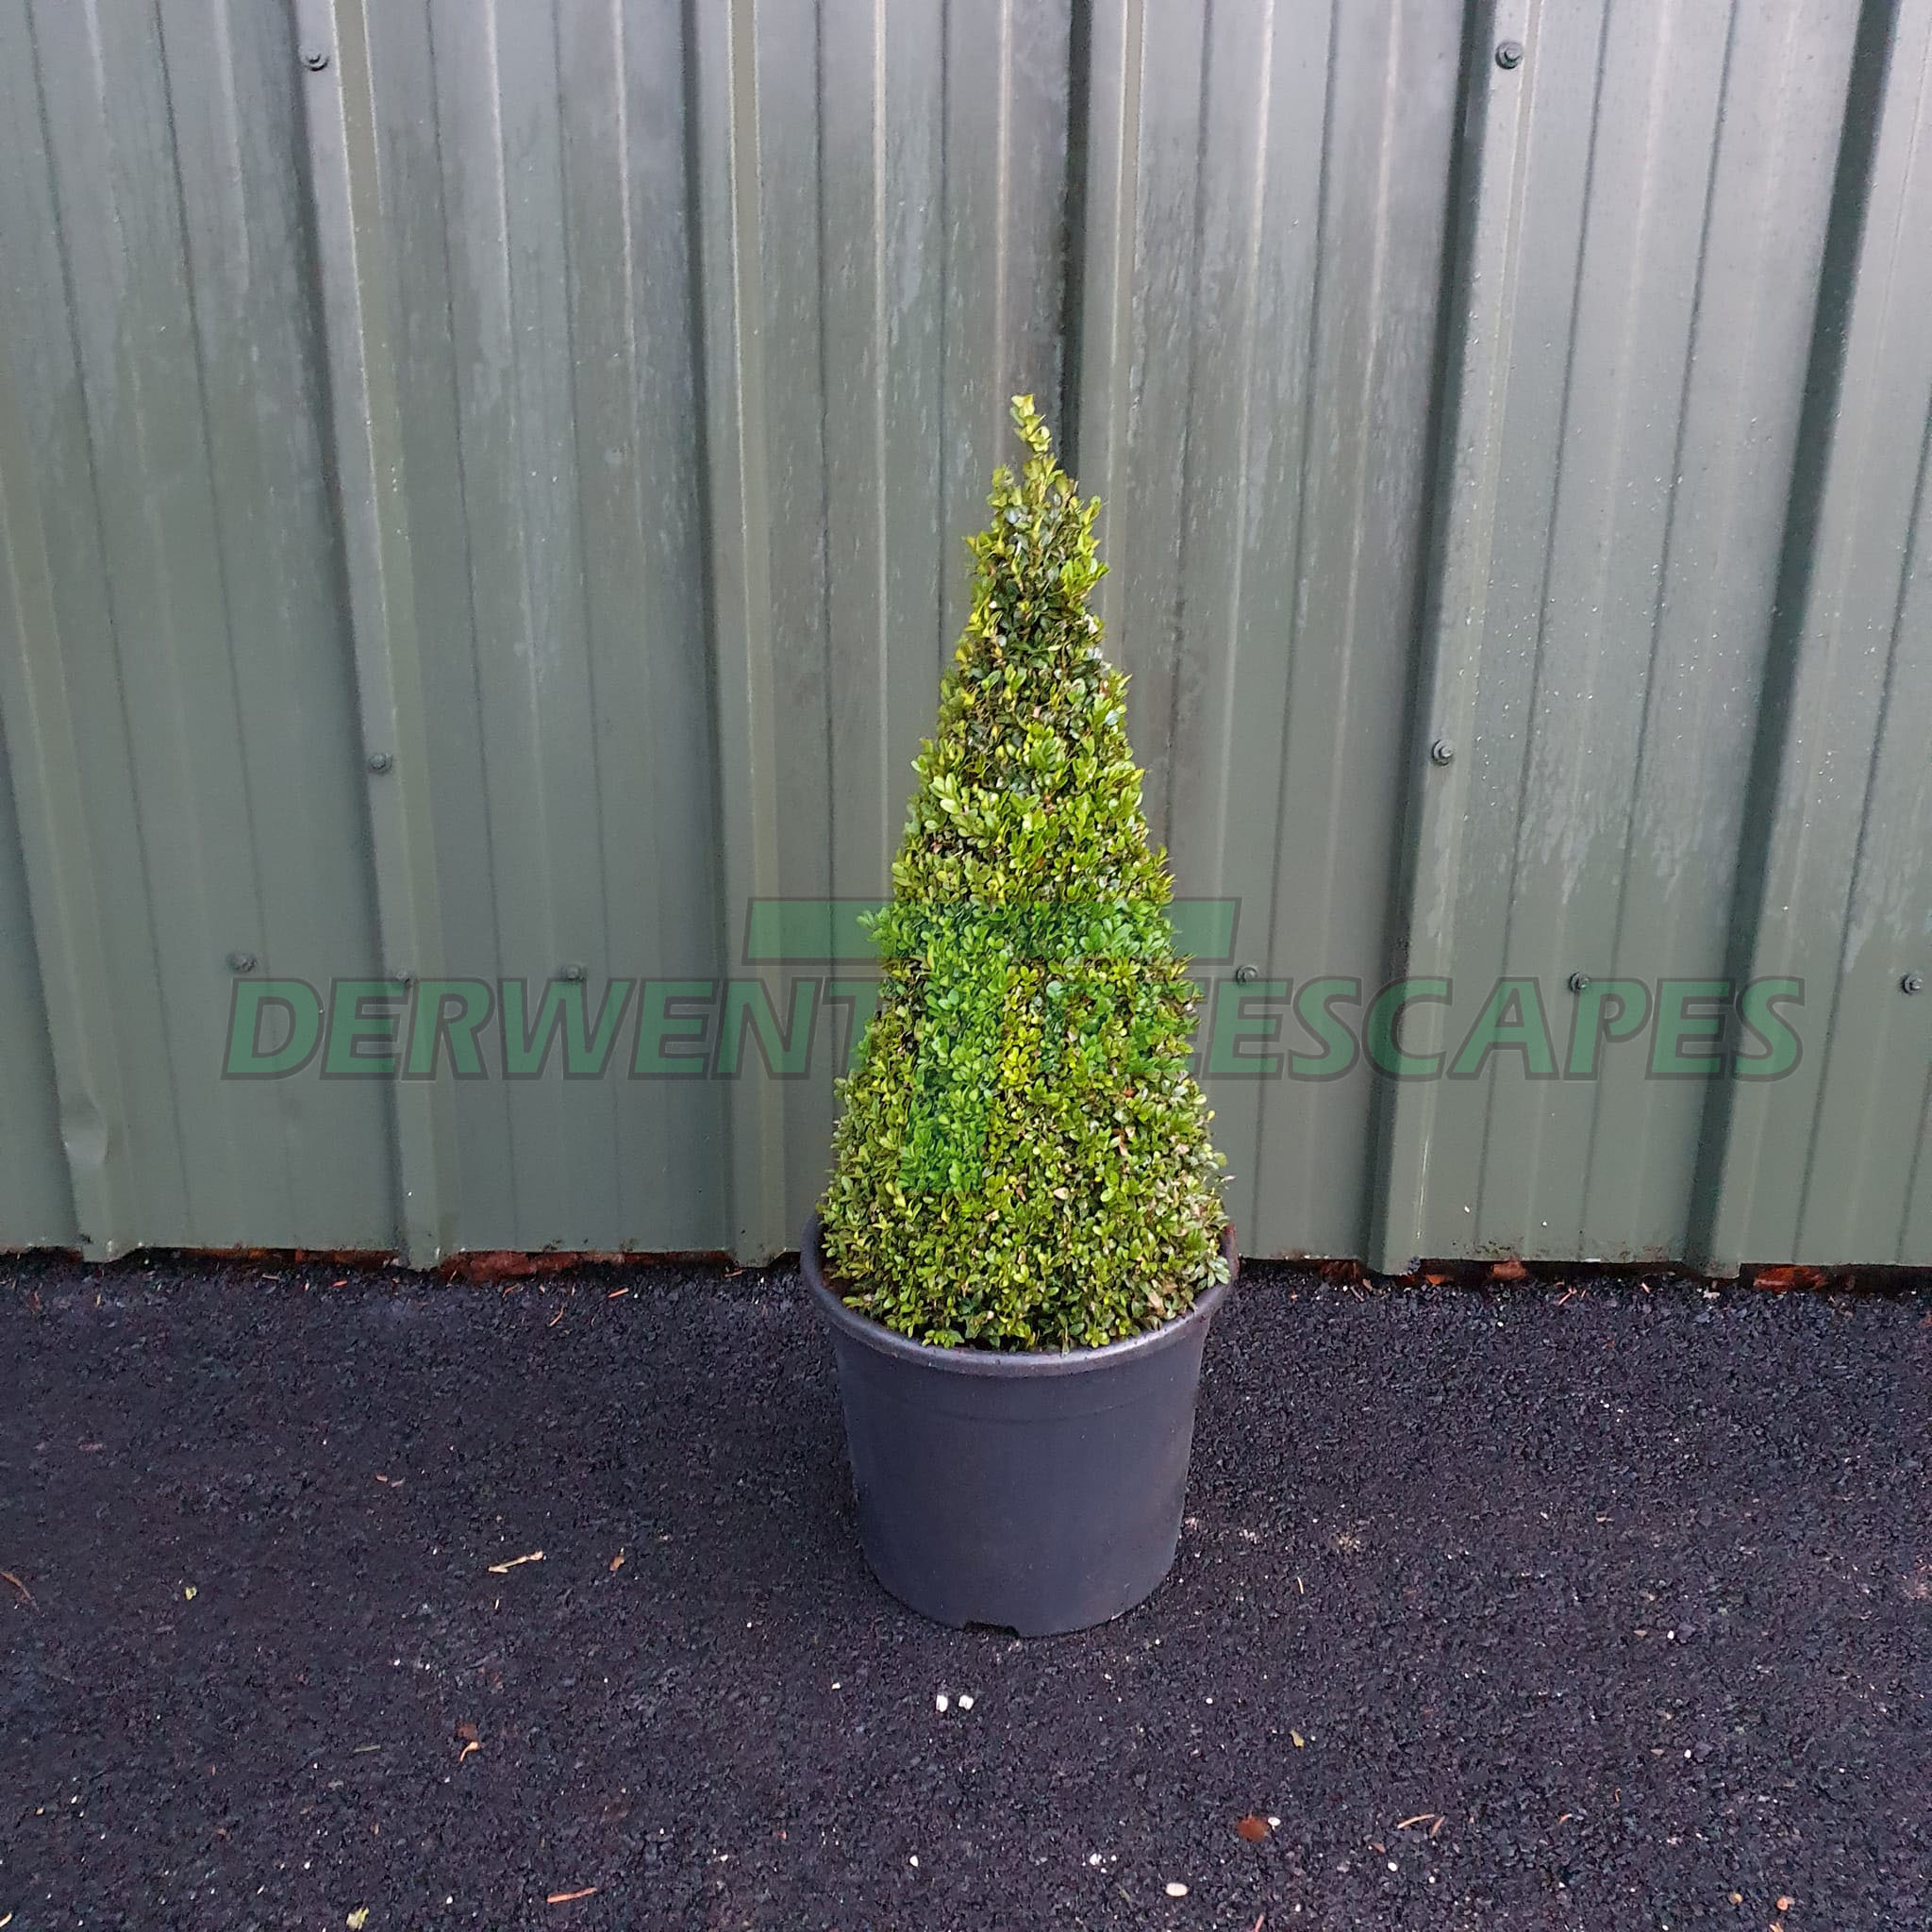 Buxus sempervirens - Pyramid Box Topiary